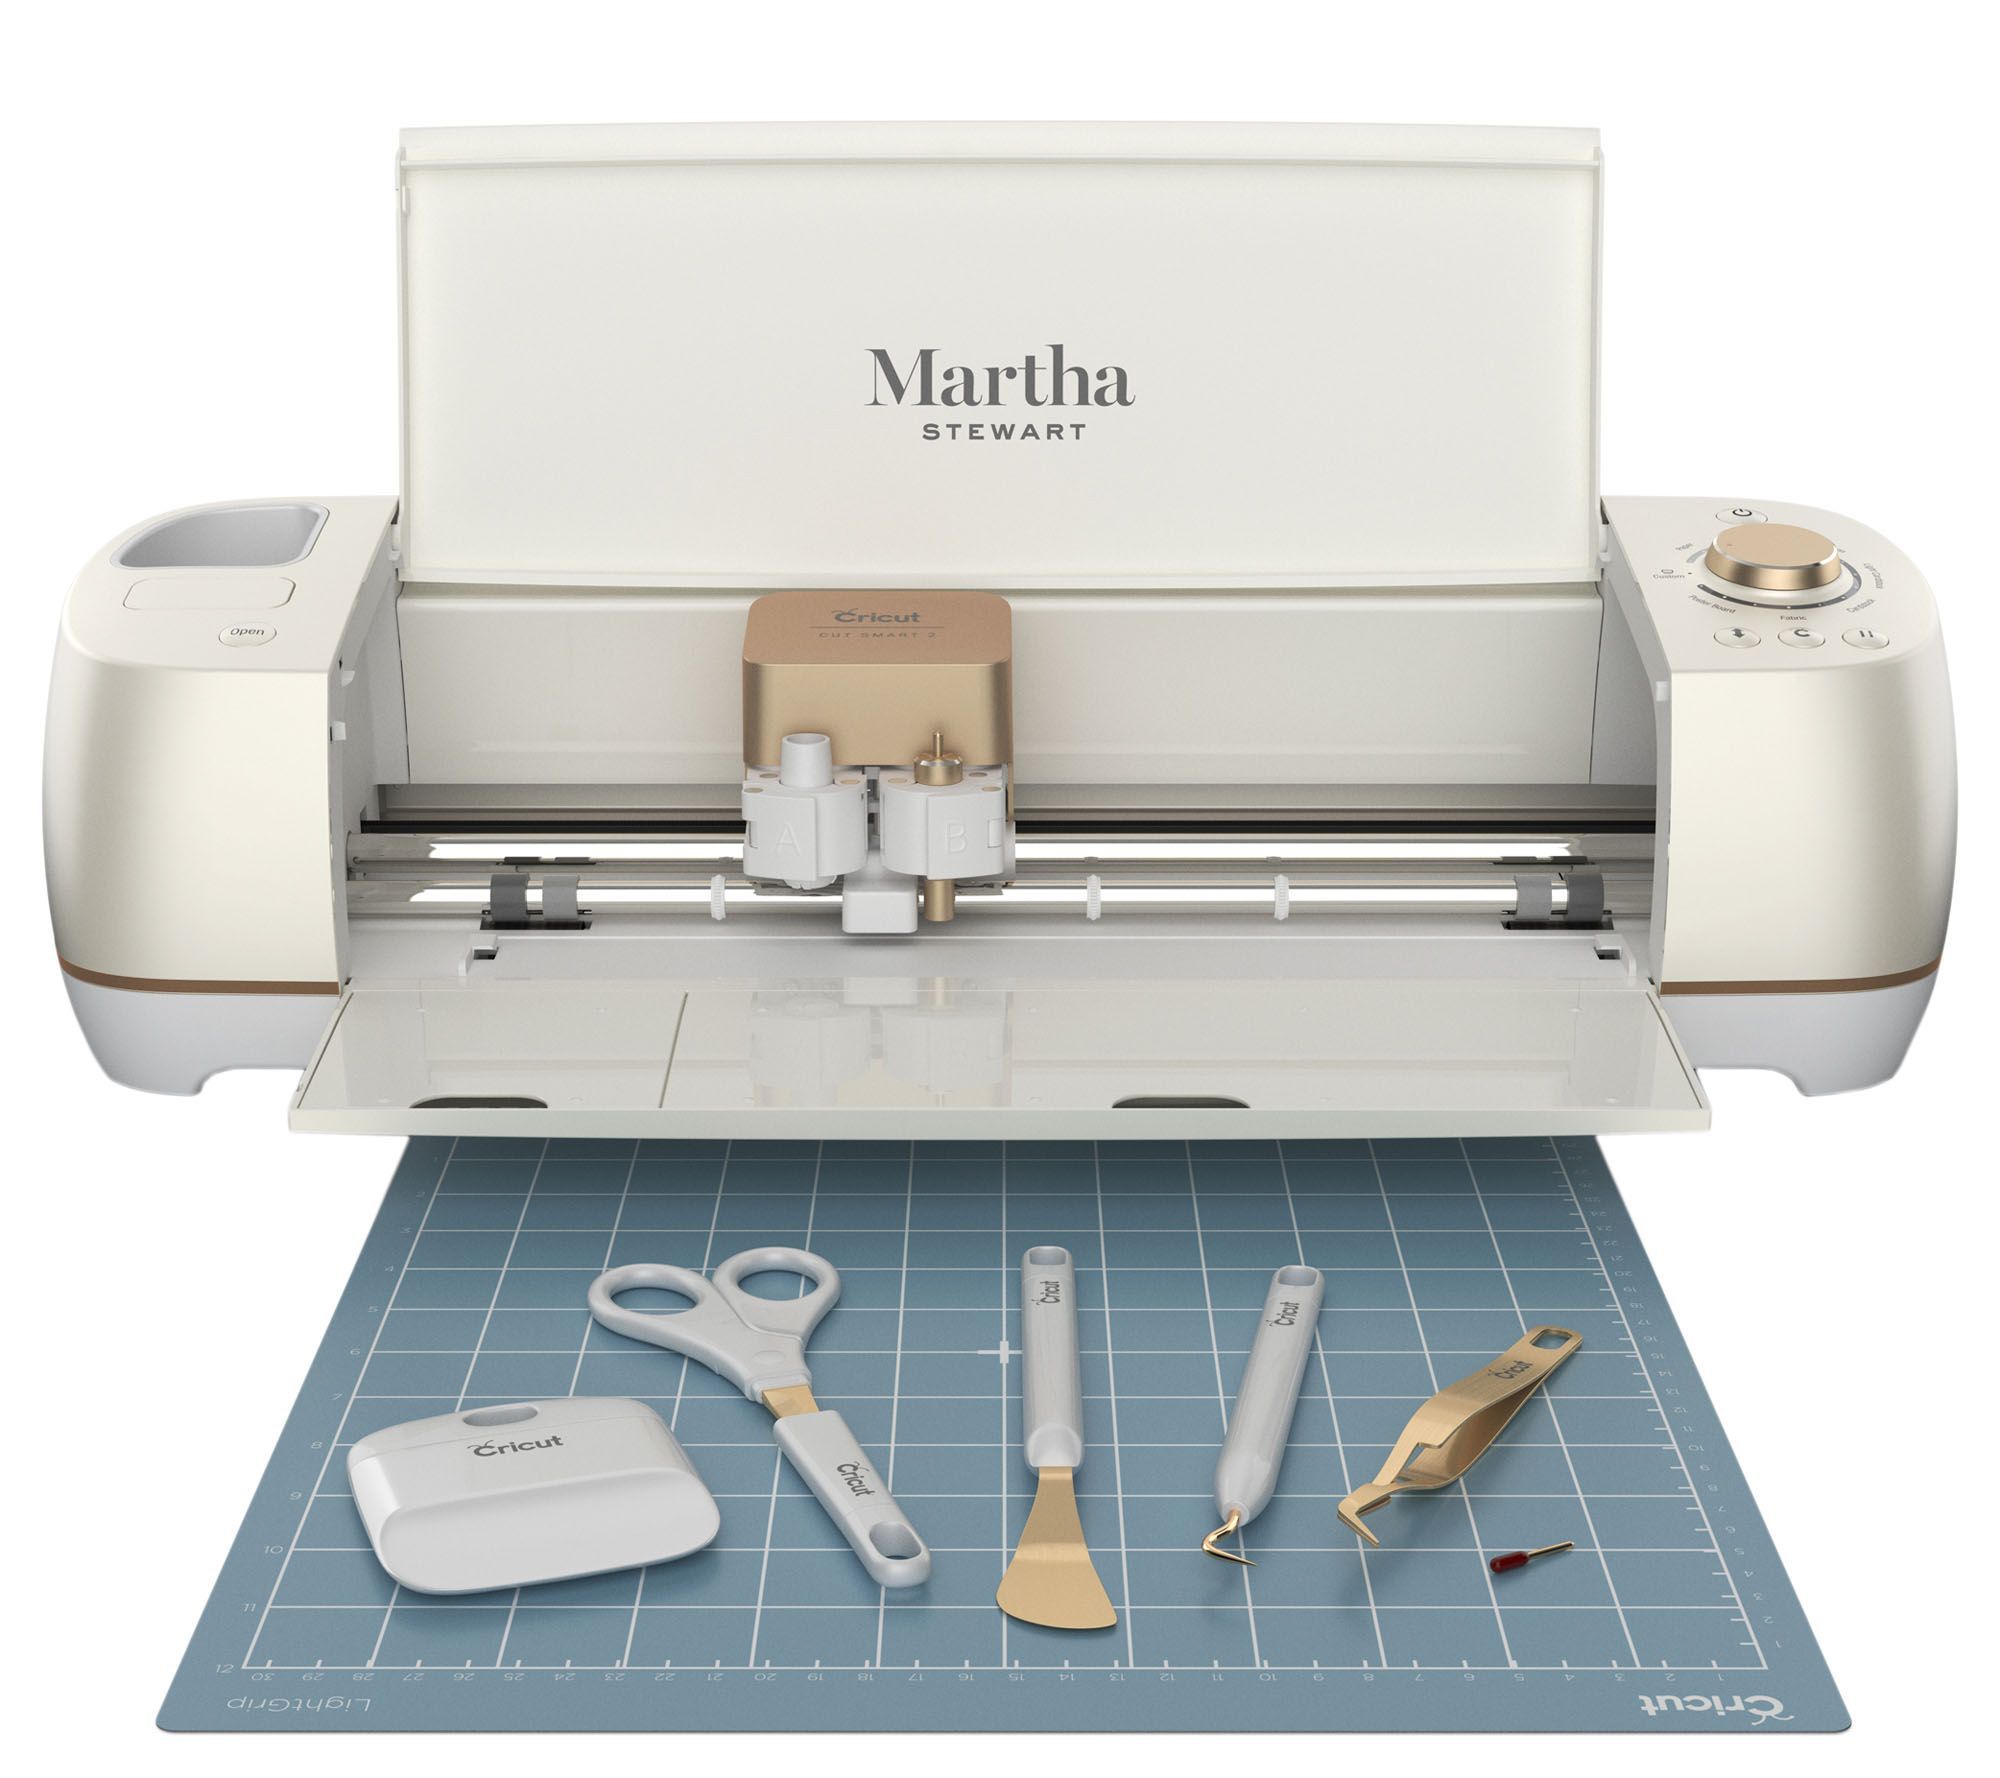 New Cricut Explore Air™ Gold Edition Adds Glam to Craft Cutting